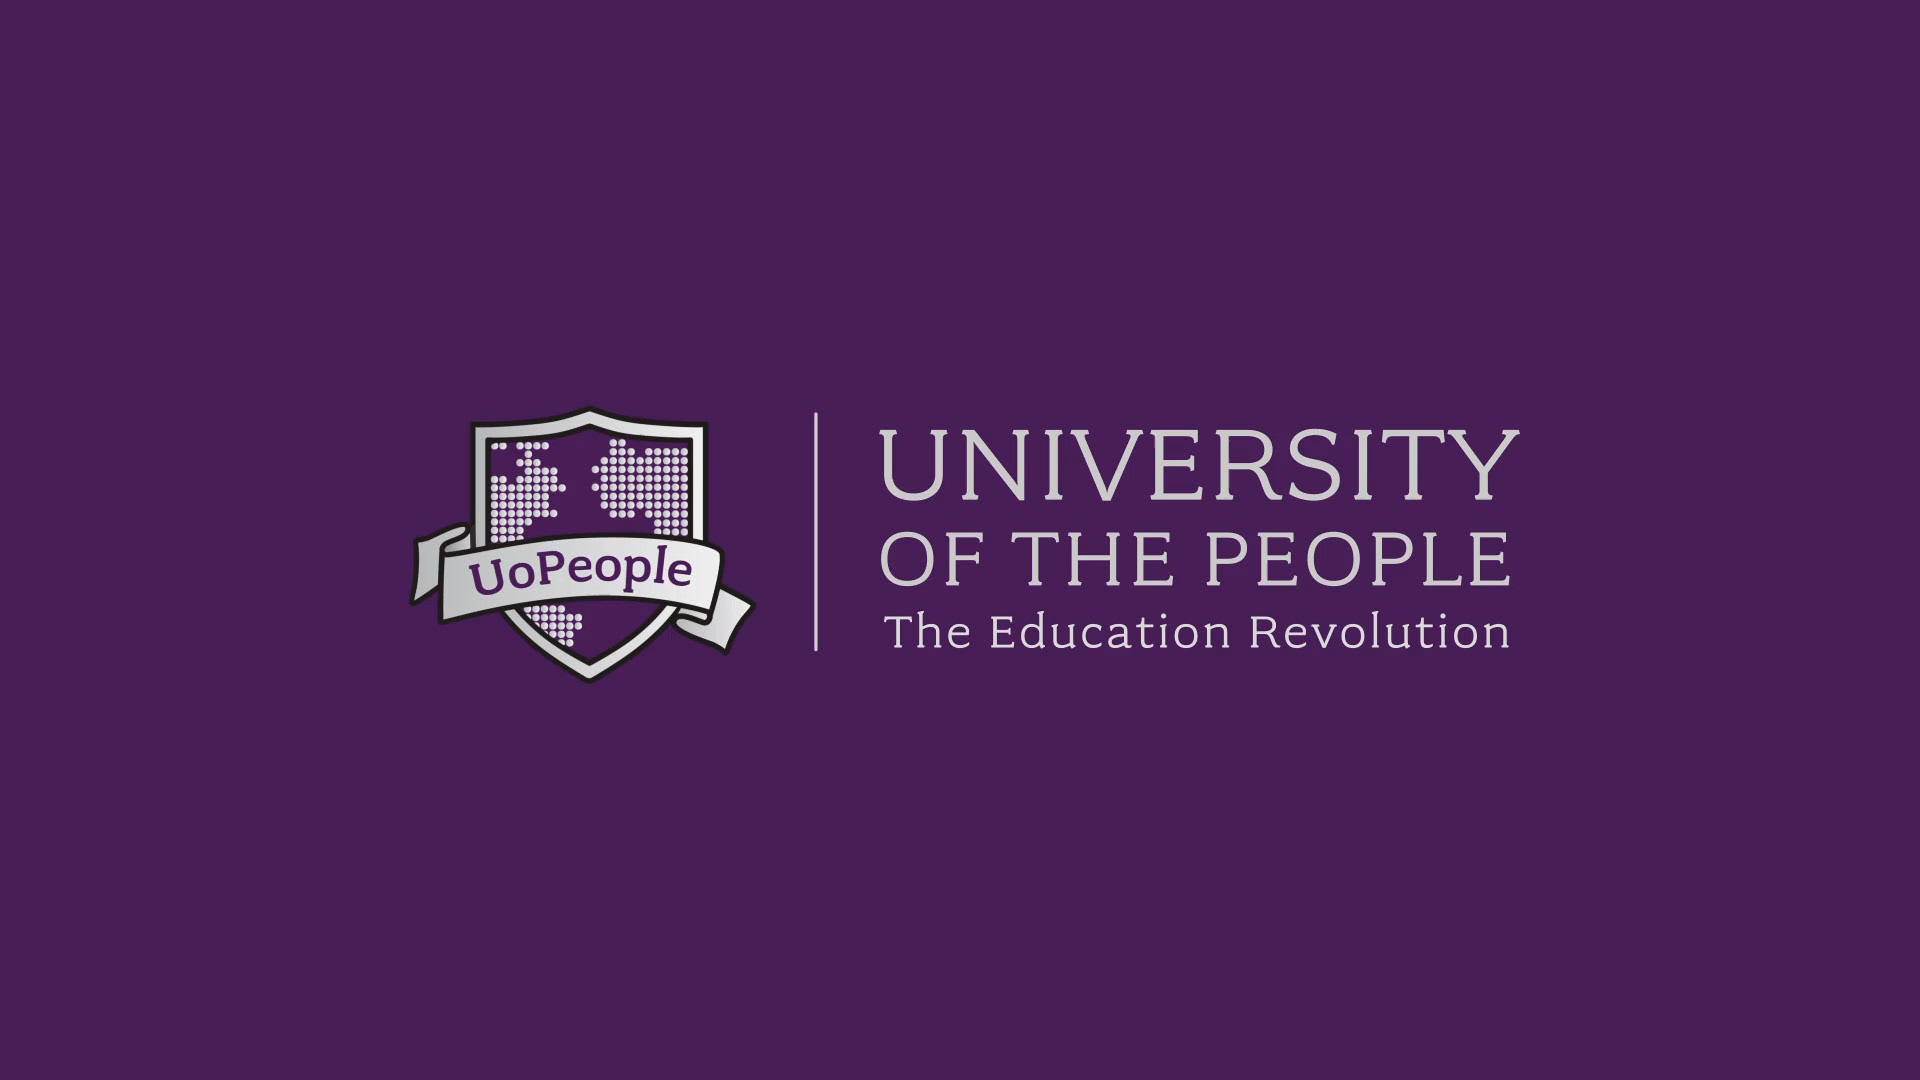 University of the People, UoPeople